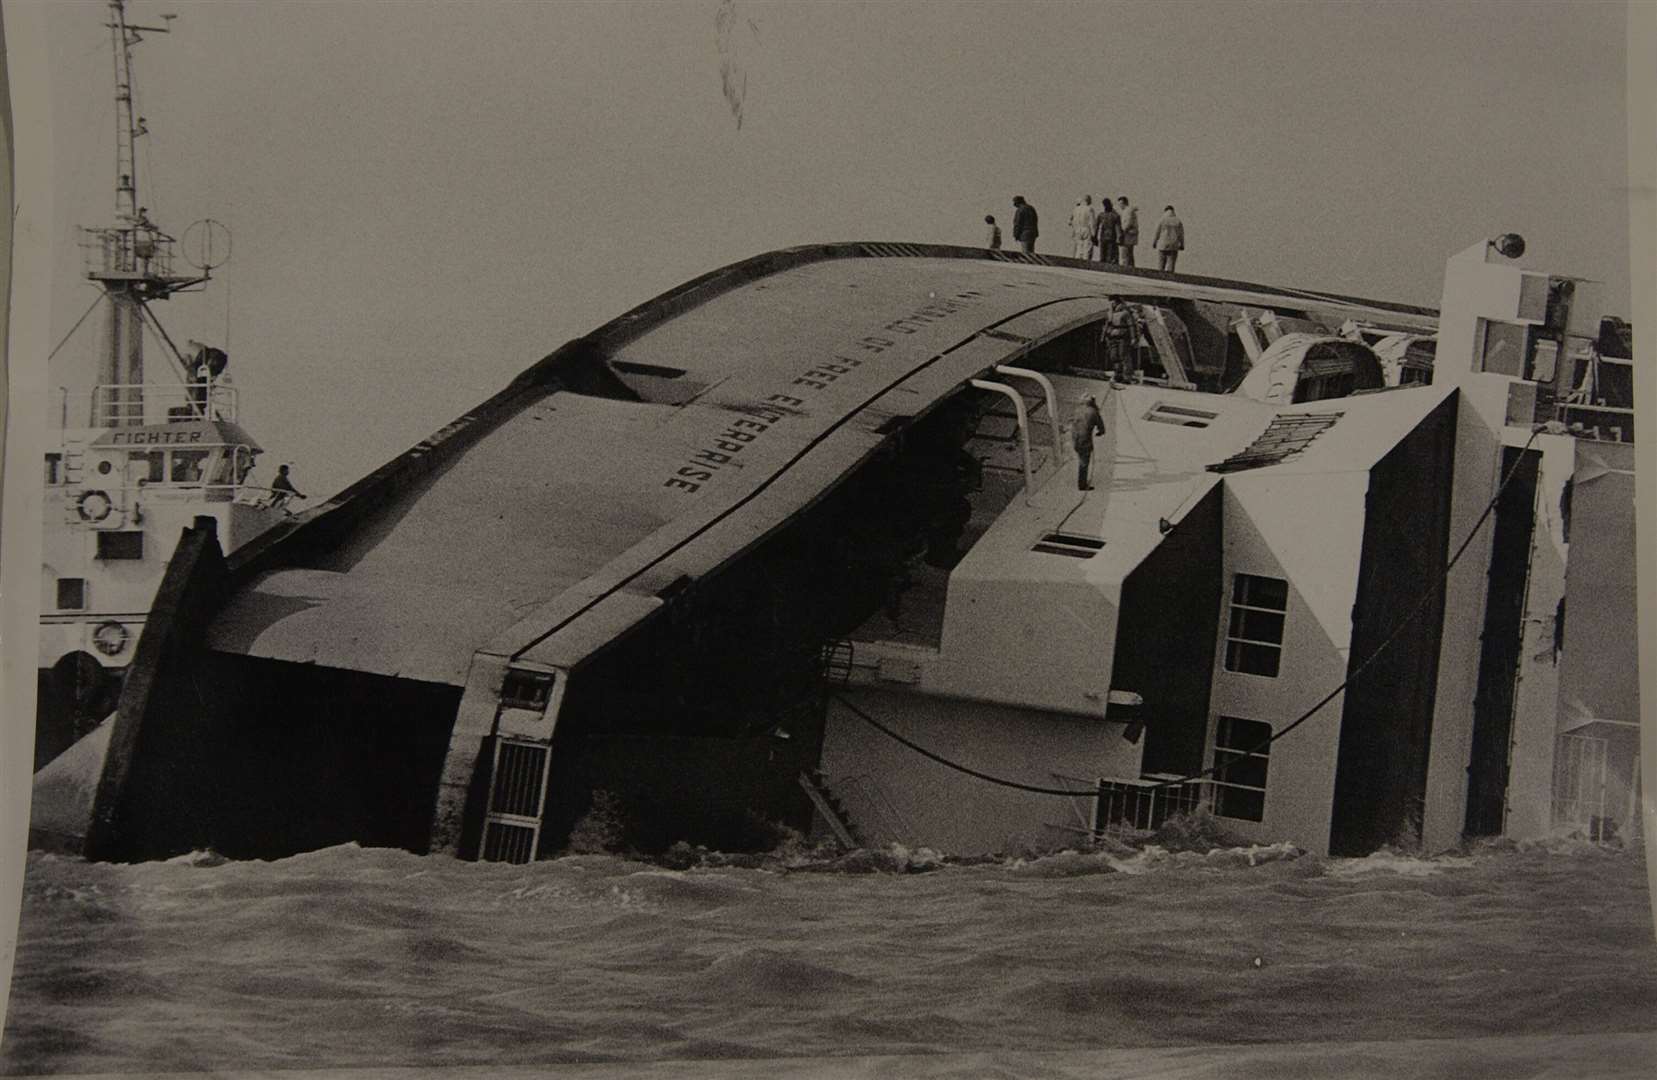 The Herald of Free Enterprise's bow doors were left open, causing it to capsize